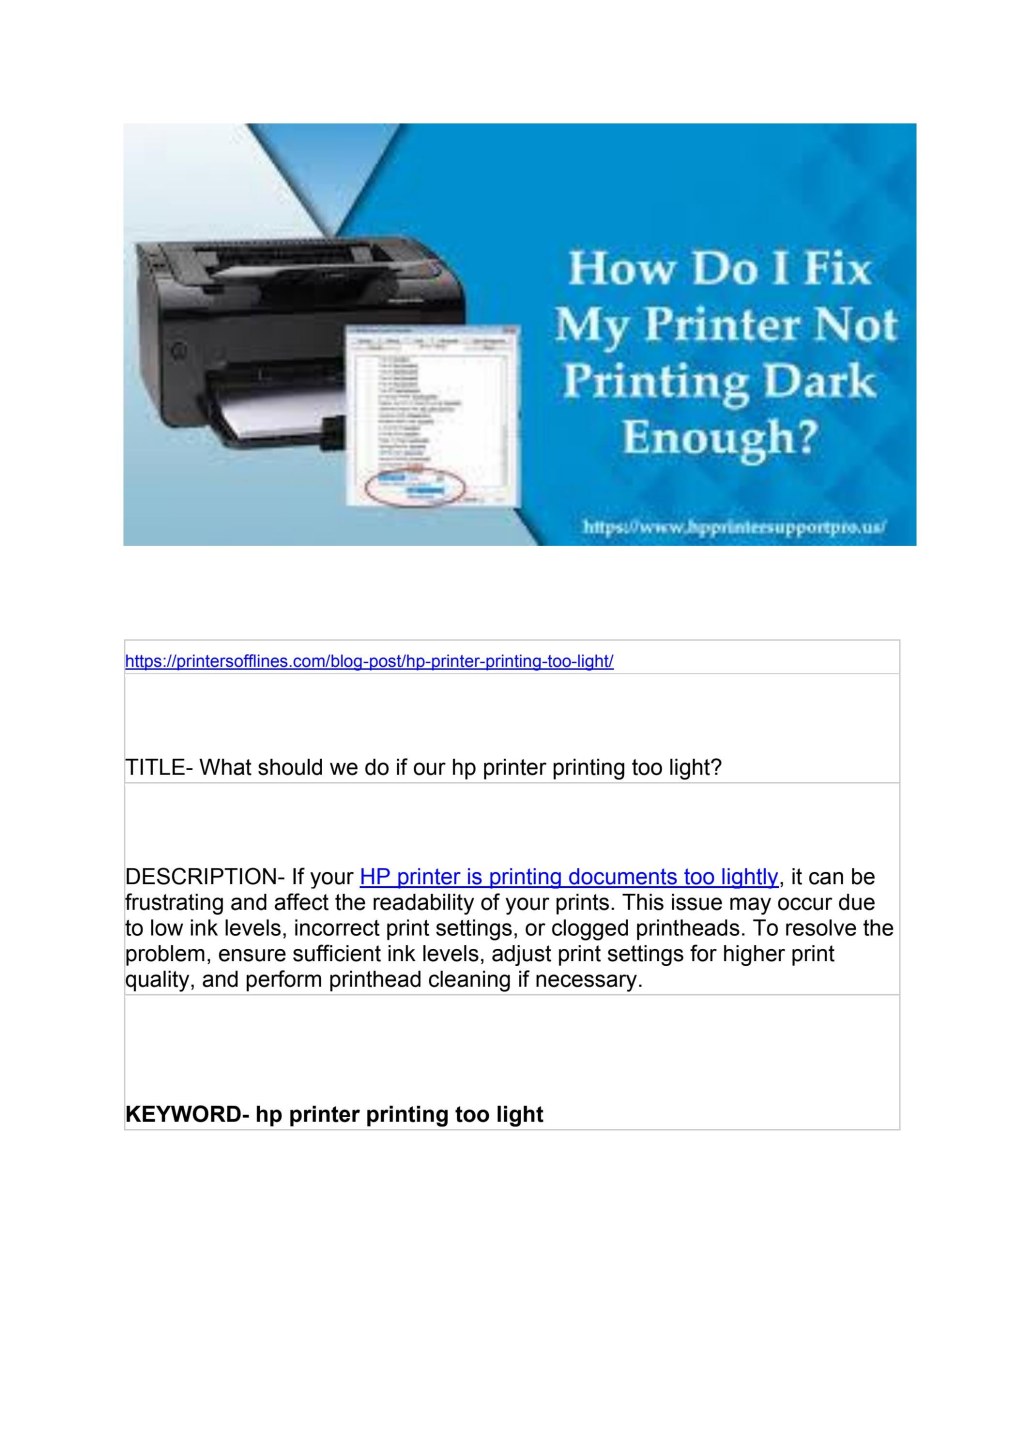 Picture of: What should we do if our hp printer printing too light? by Falon